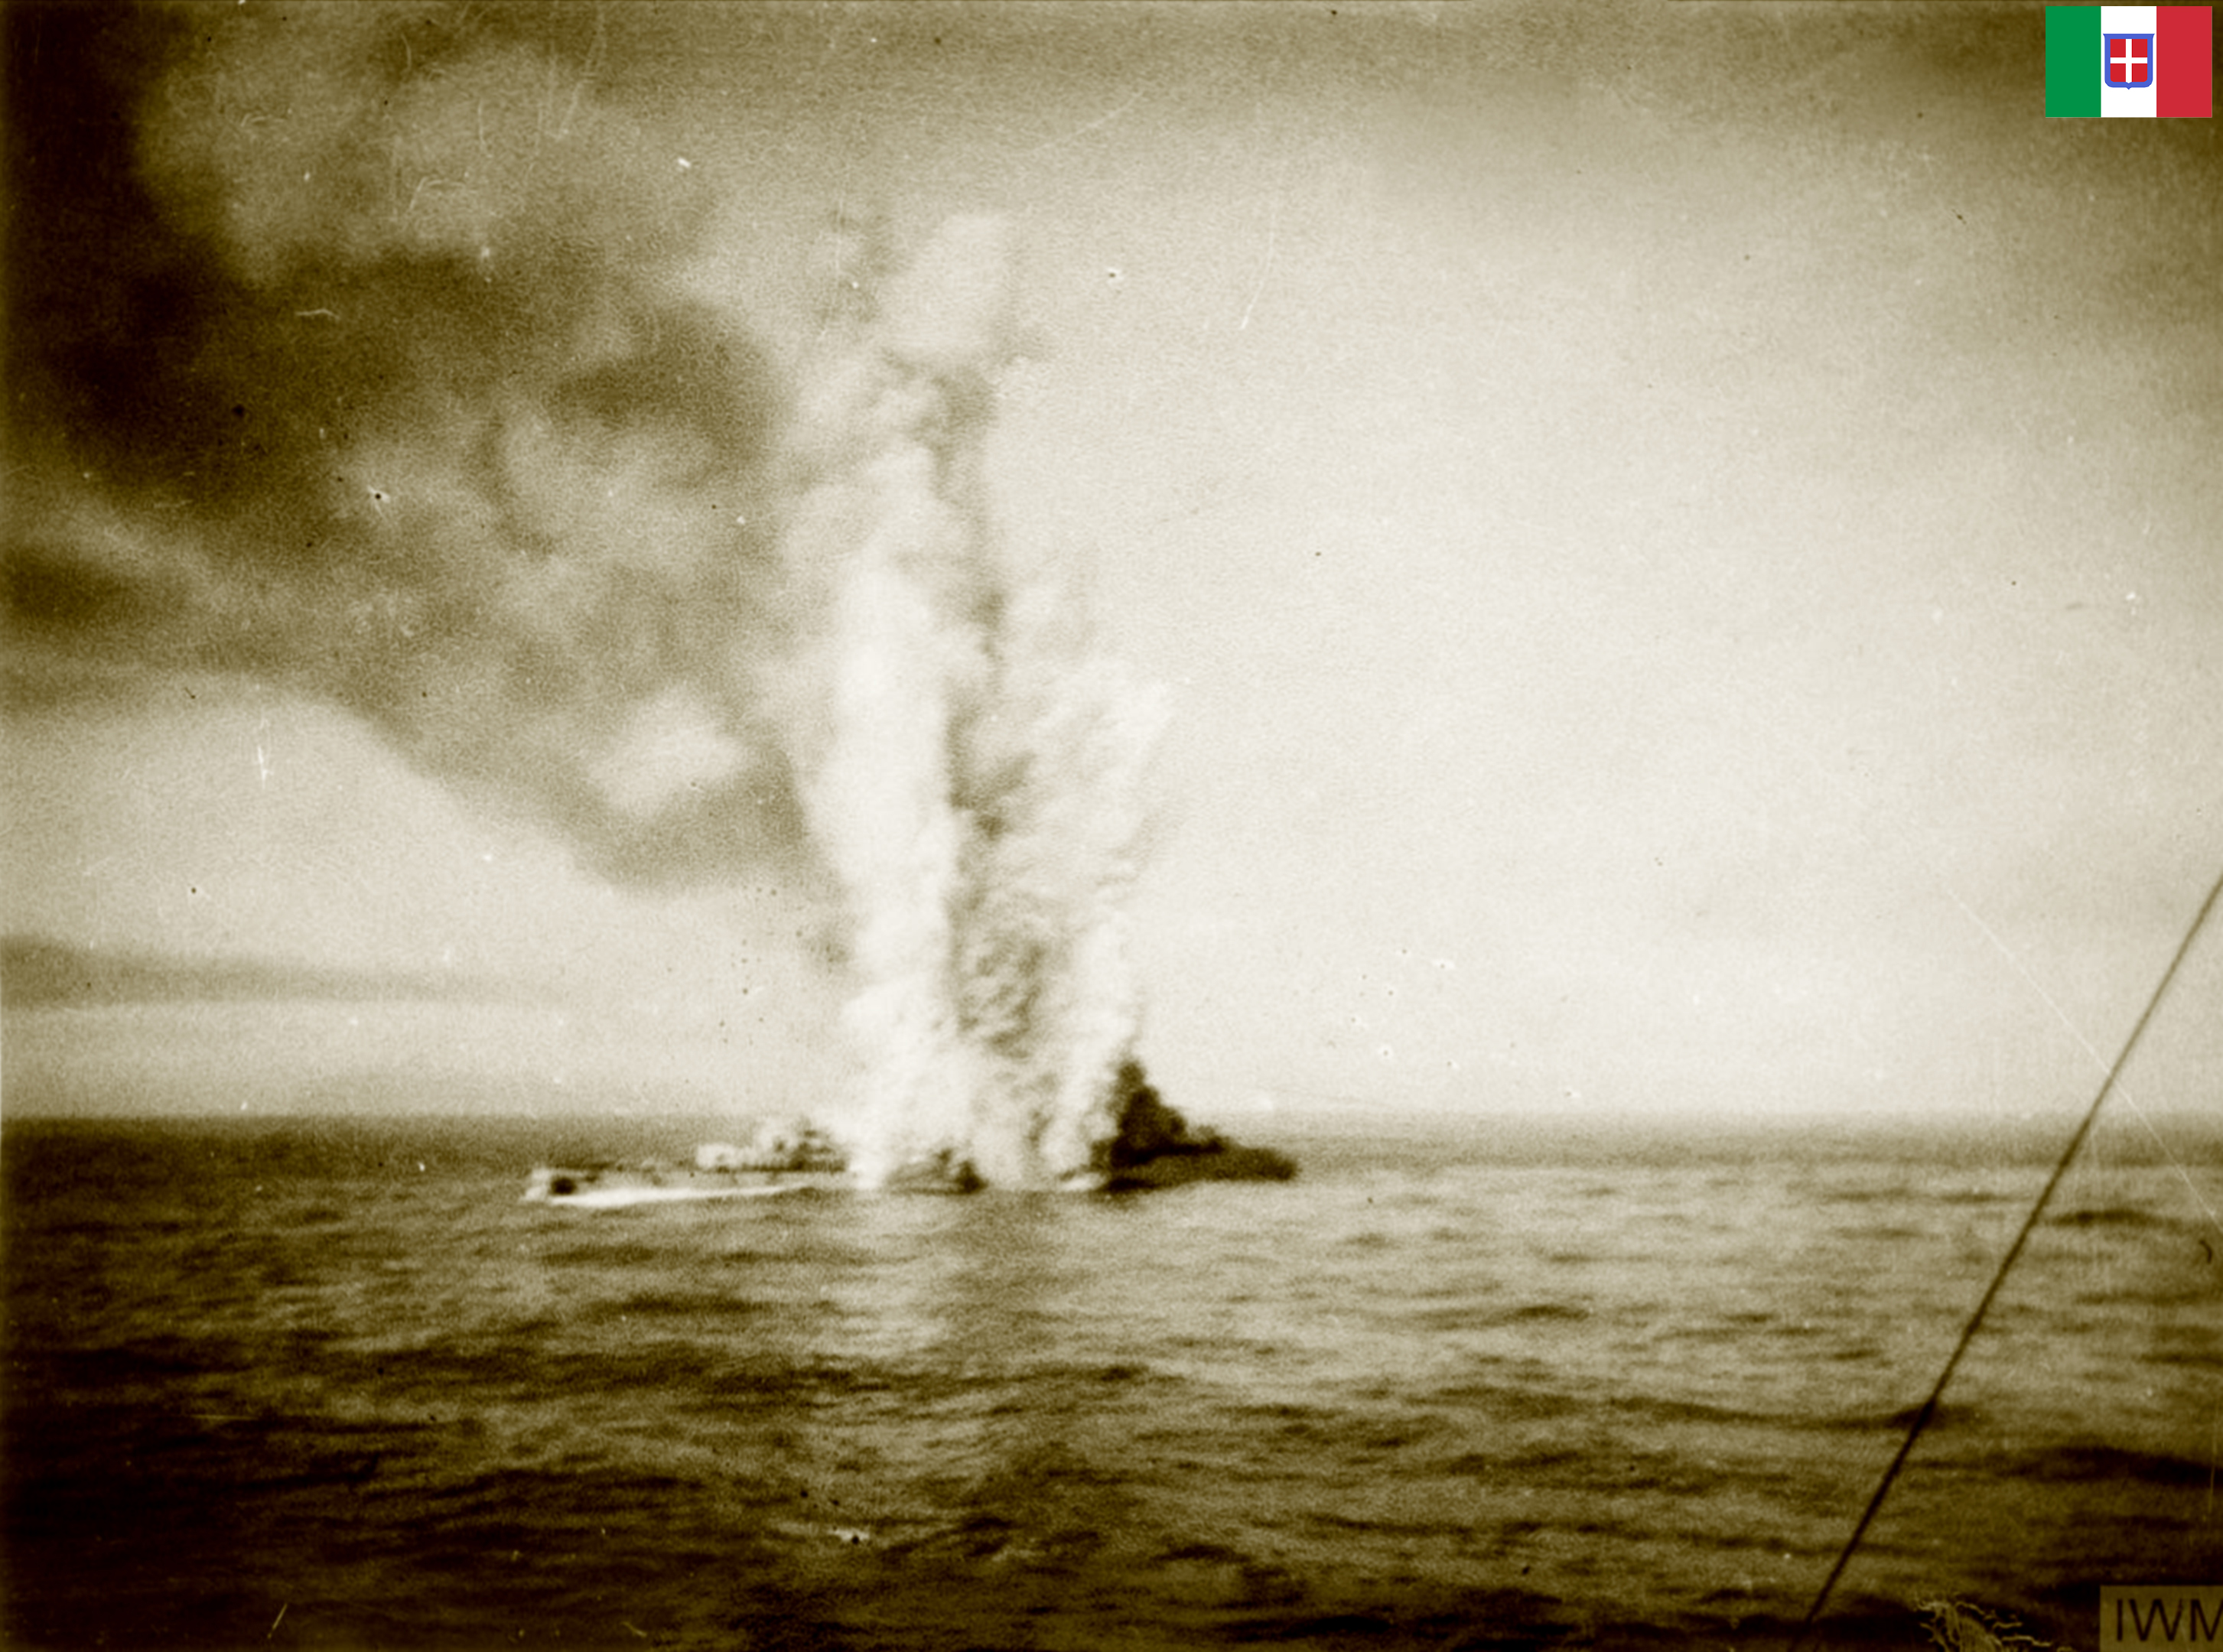 Battle of Cape Spada tower of smoke pours from the Bartolomeo Colleoni just before she sinks IWM A221